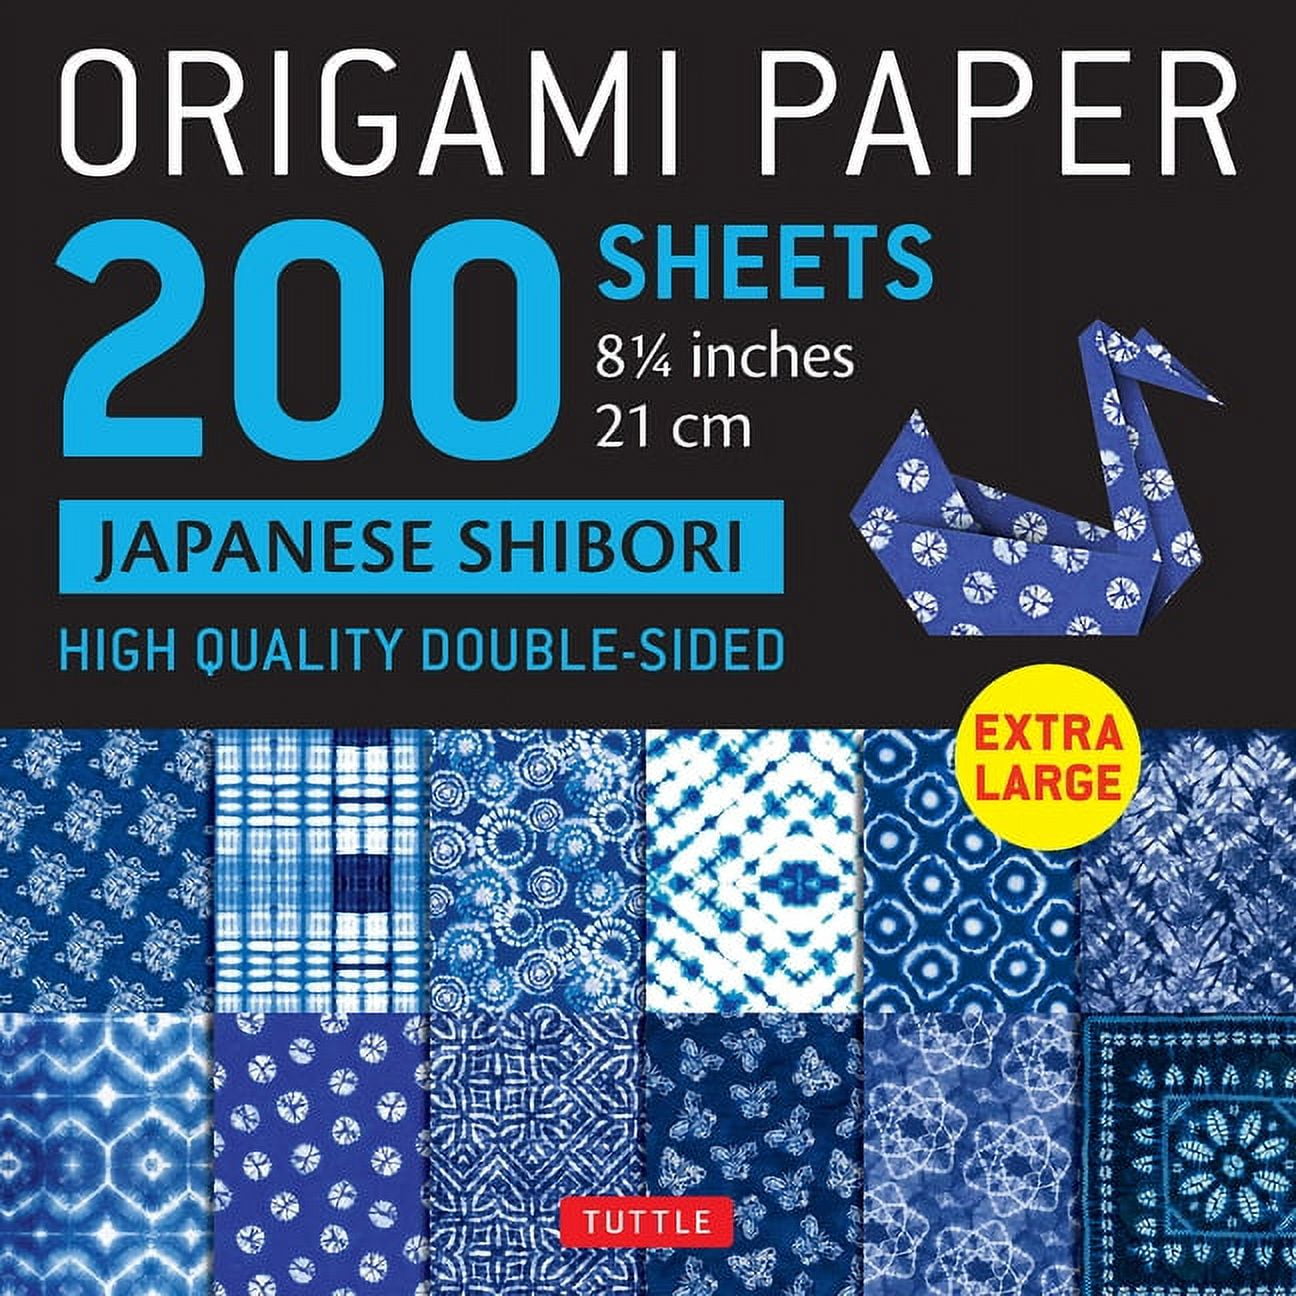 Extra Large 12 x 12 inch Origami Paper Sheets Japanese Origami Paper Pack  Origami Papers for Origami Cranes